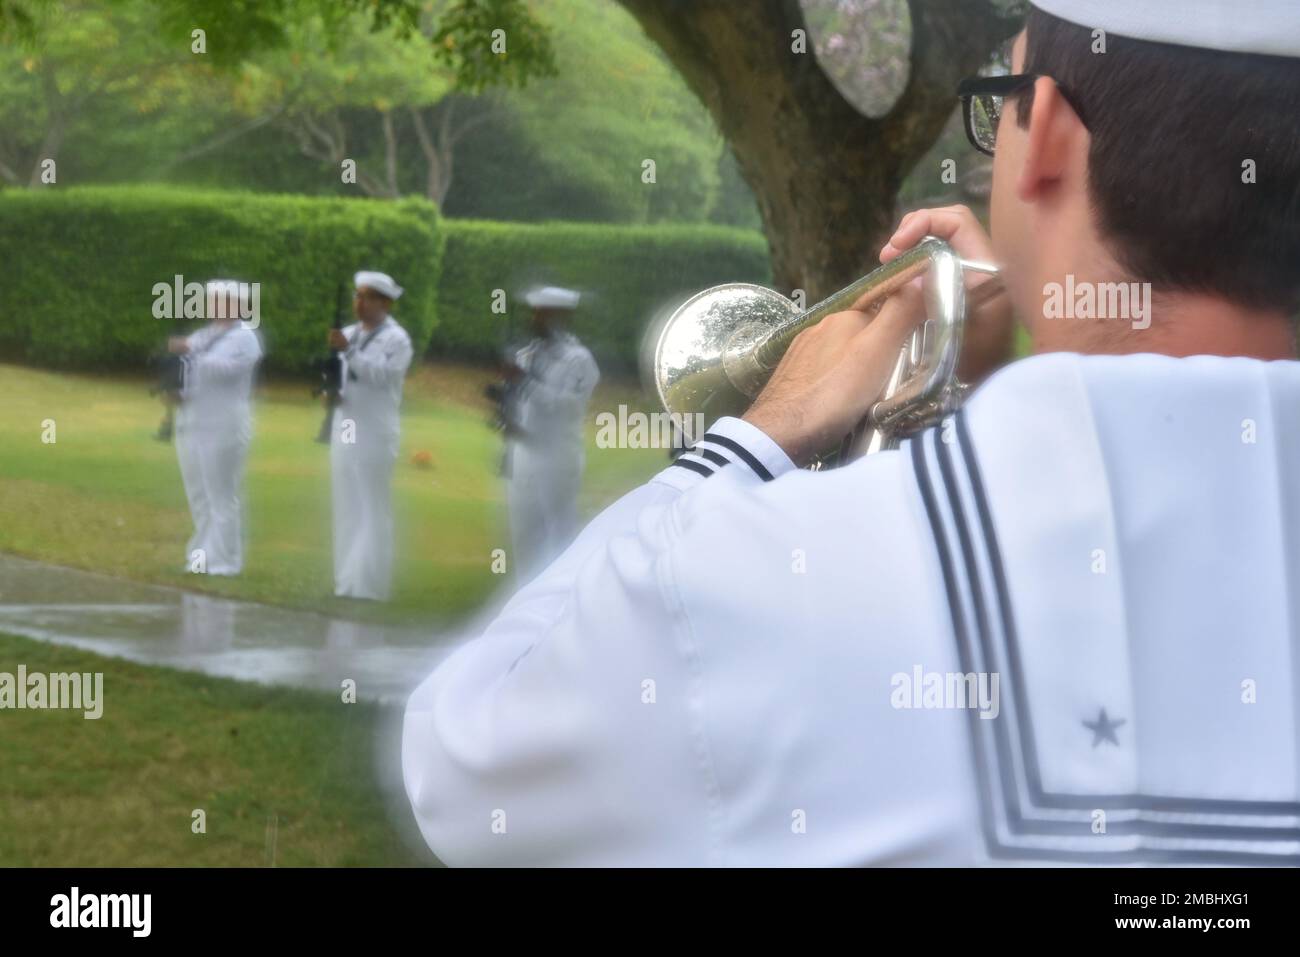 A Sailor assigned to U.S. Navy Region Hawaii plays Taps during an internment ceremony for U.S. Navy Machinist's Mate 2nd Class Everett Raymond Stewart, of California, at the National Memorial Cemetery of the Pacific, Honolulu, Hawaii, June 16, 2022. Stewart was assigned to the USS Oklahoma, which sustained fire from Japanese aircraft and multiple torpedo hits causing the ship to capsize and resulted in the deaths of more than 400 crew members on Dec. 7, 1941, at Ford Island, Pearl Harbor. Stewart was recently identified through DNA analysis by the Defense POW/MIA Accounting Agency (DPAA) foren Stock Photo